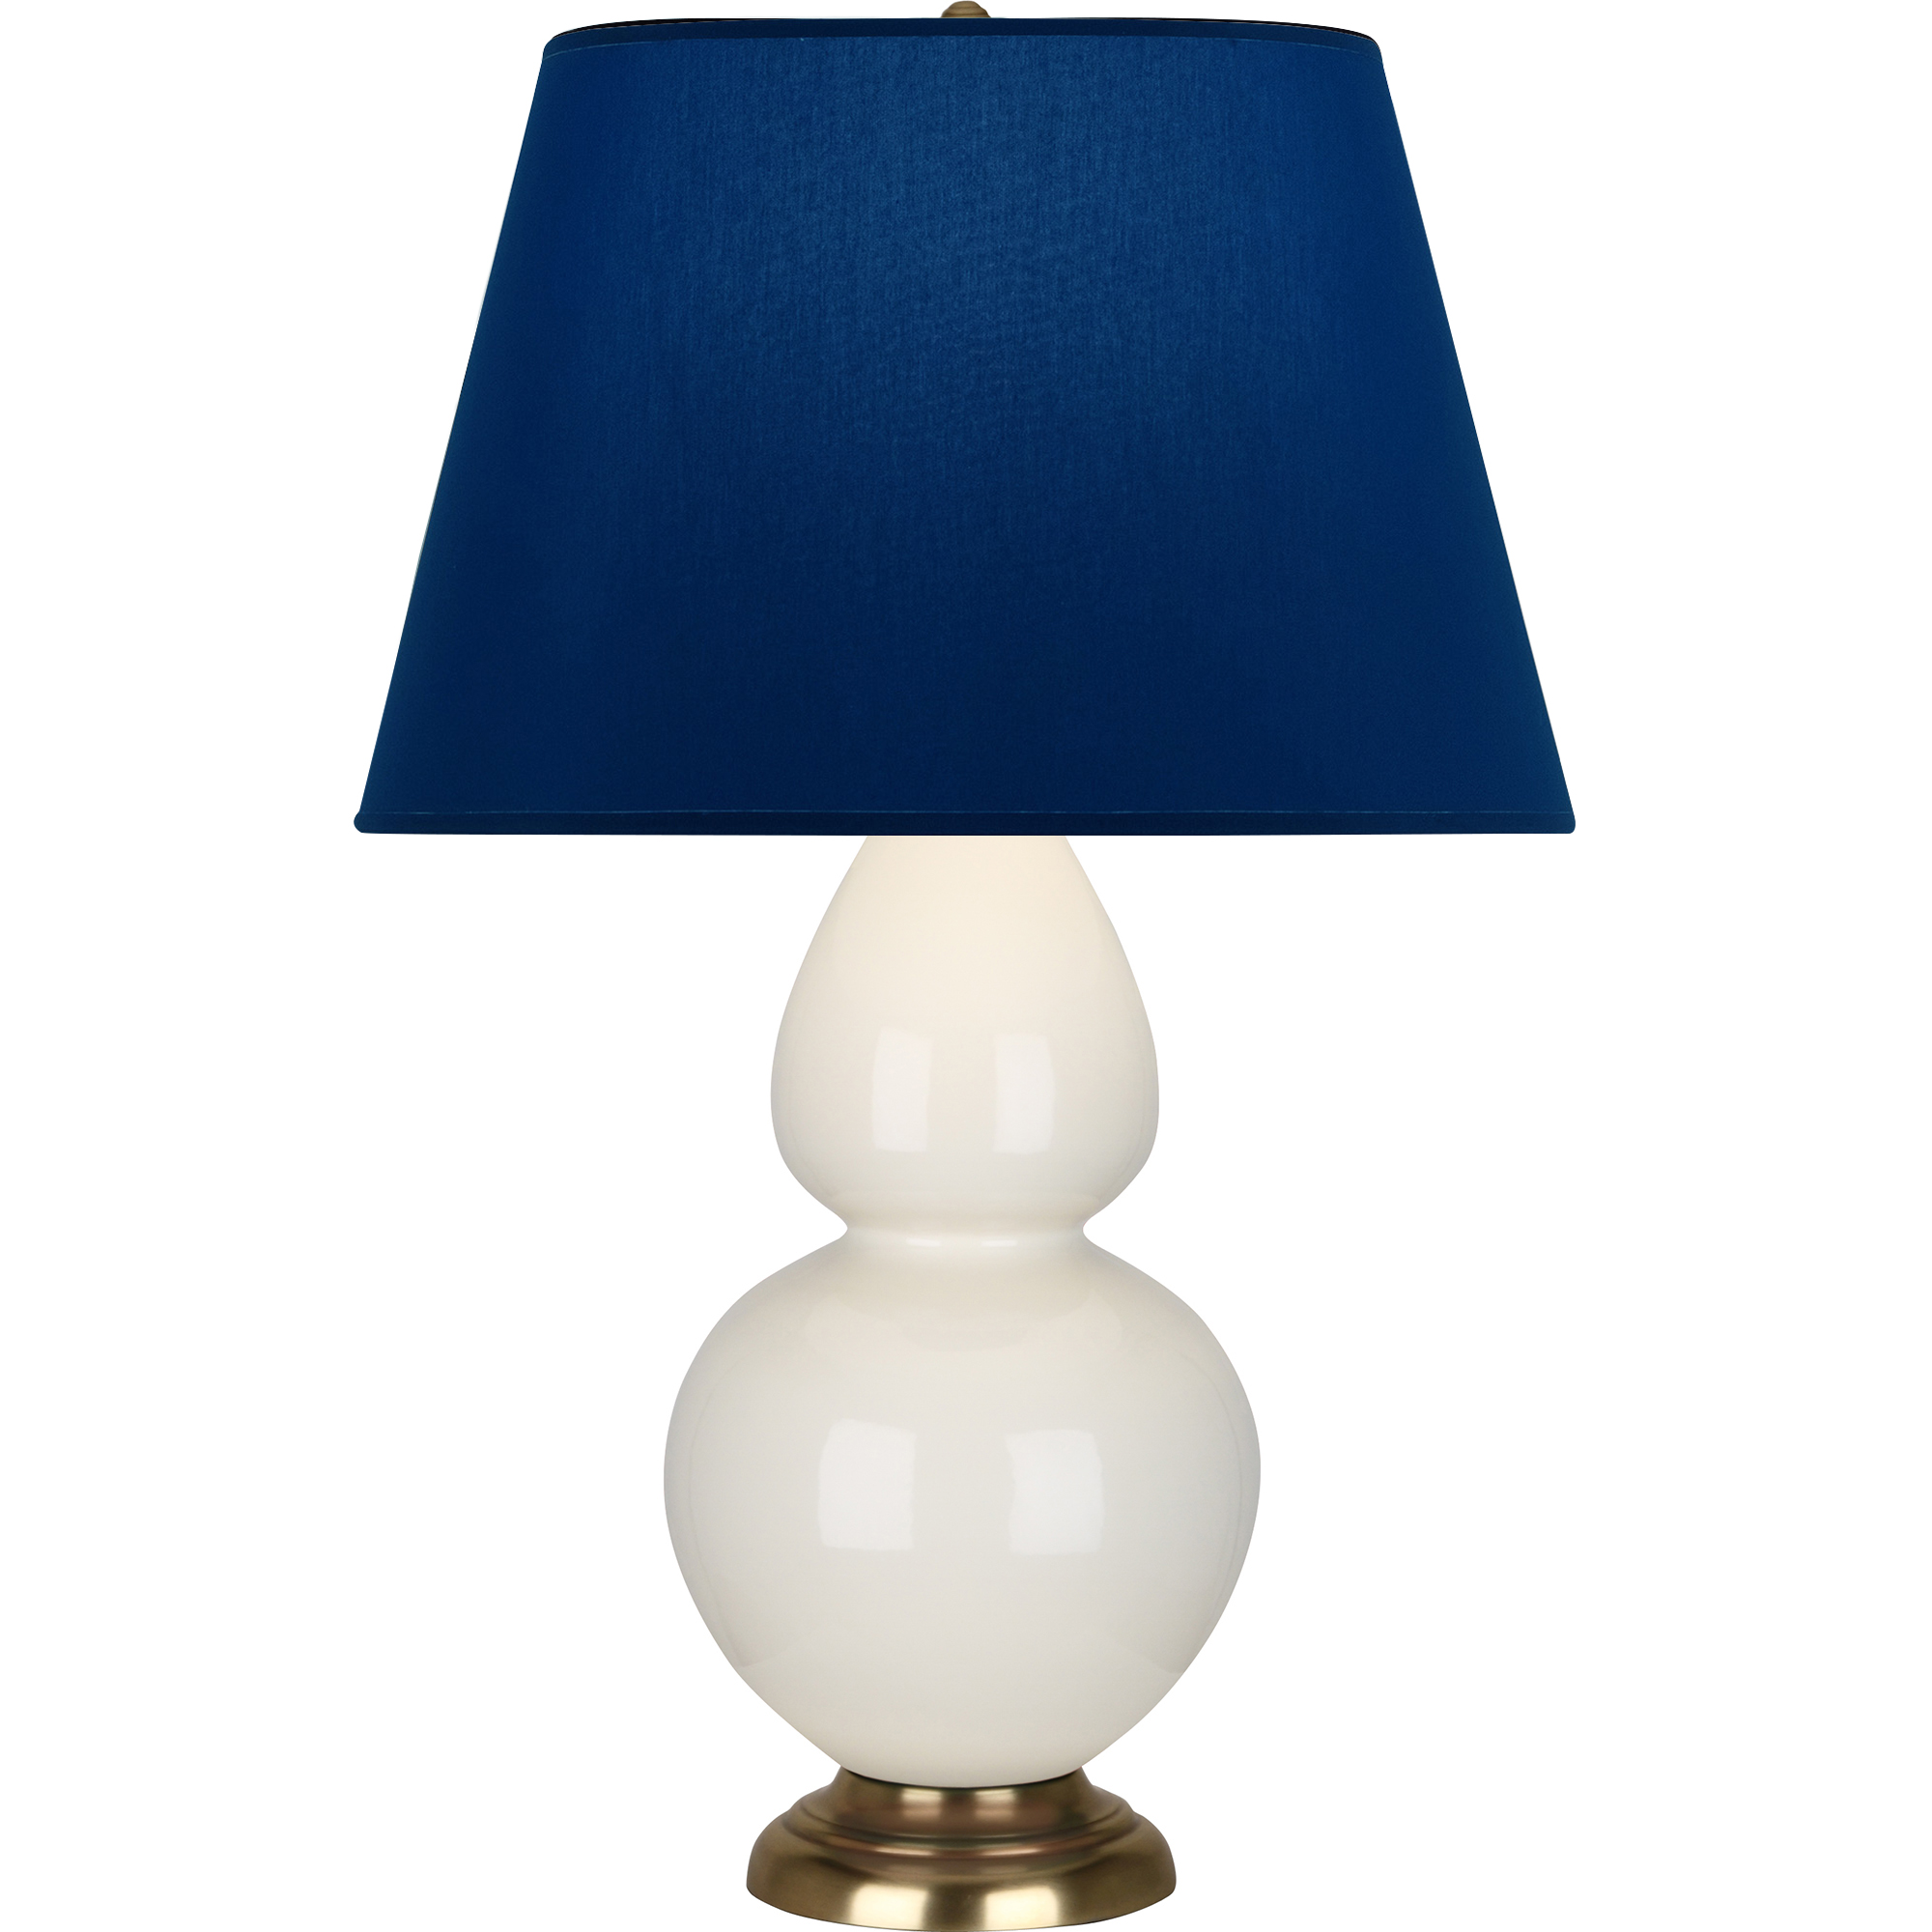 Double Gourd Table Lamp Style #1754N